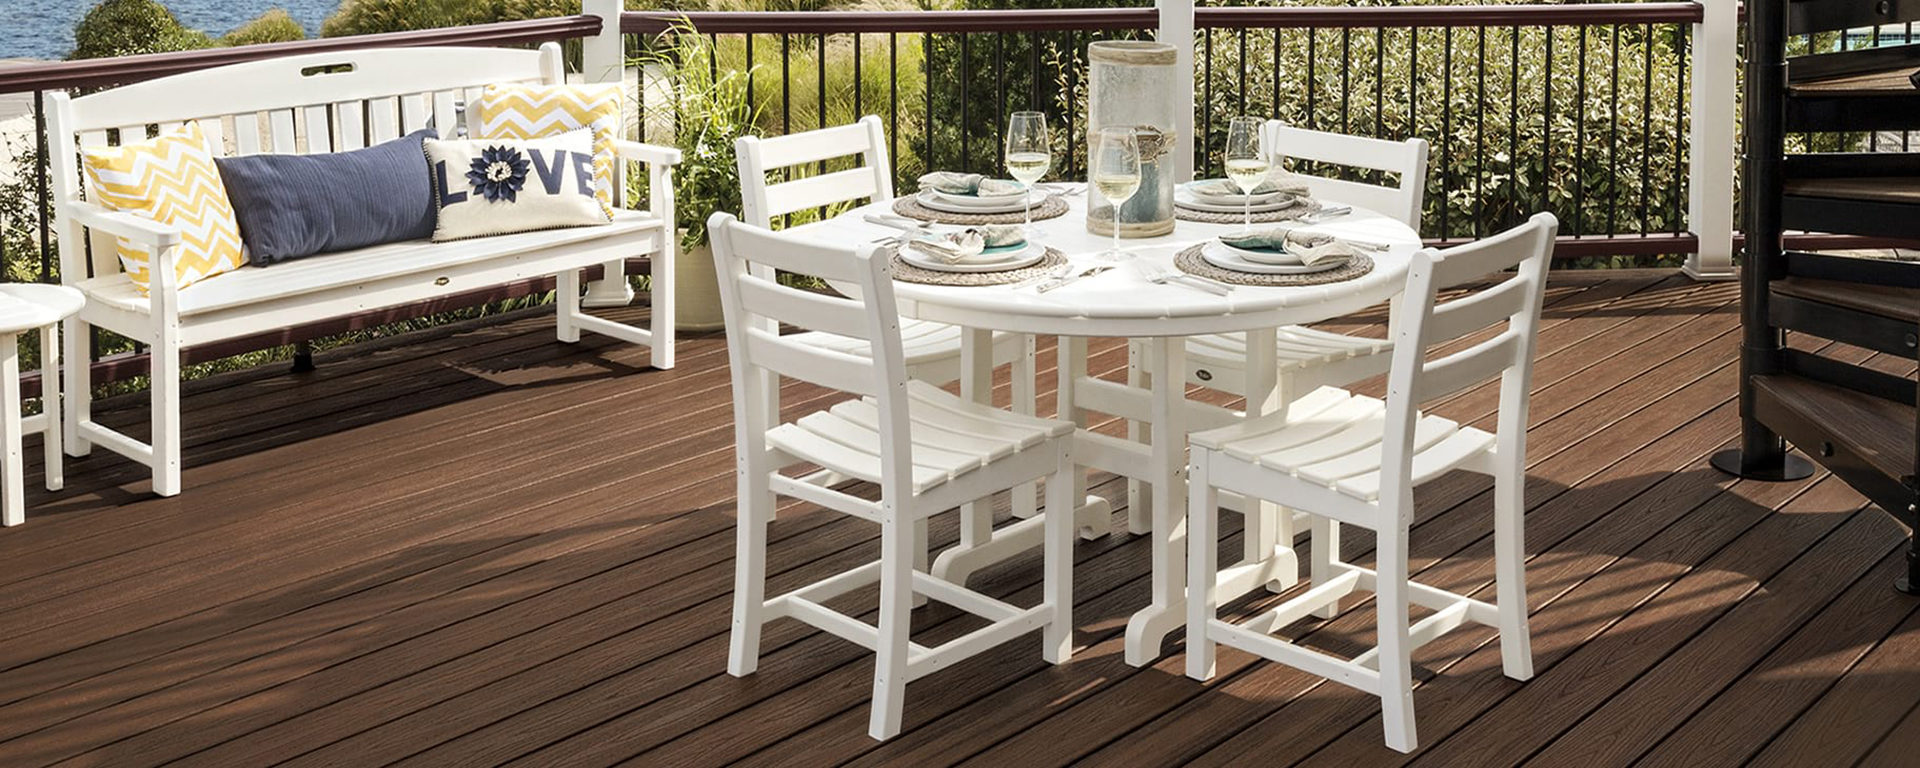 How Much Furniture Your Deck Needs | Trex® Furniture